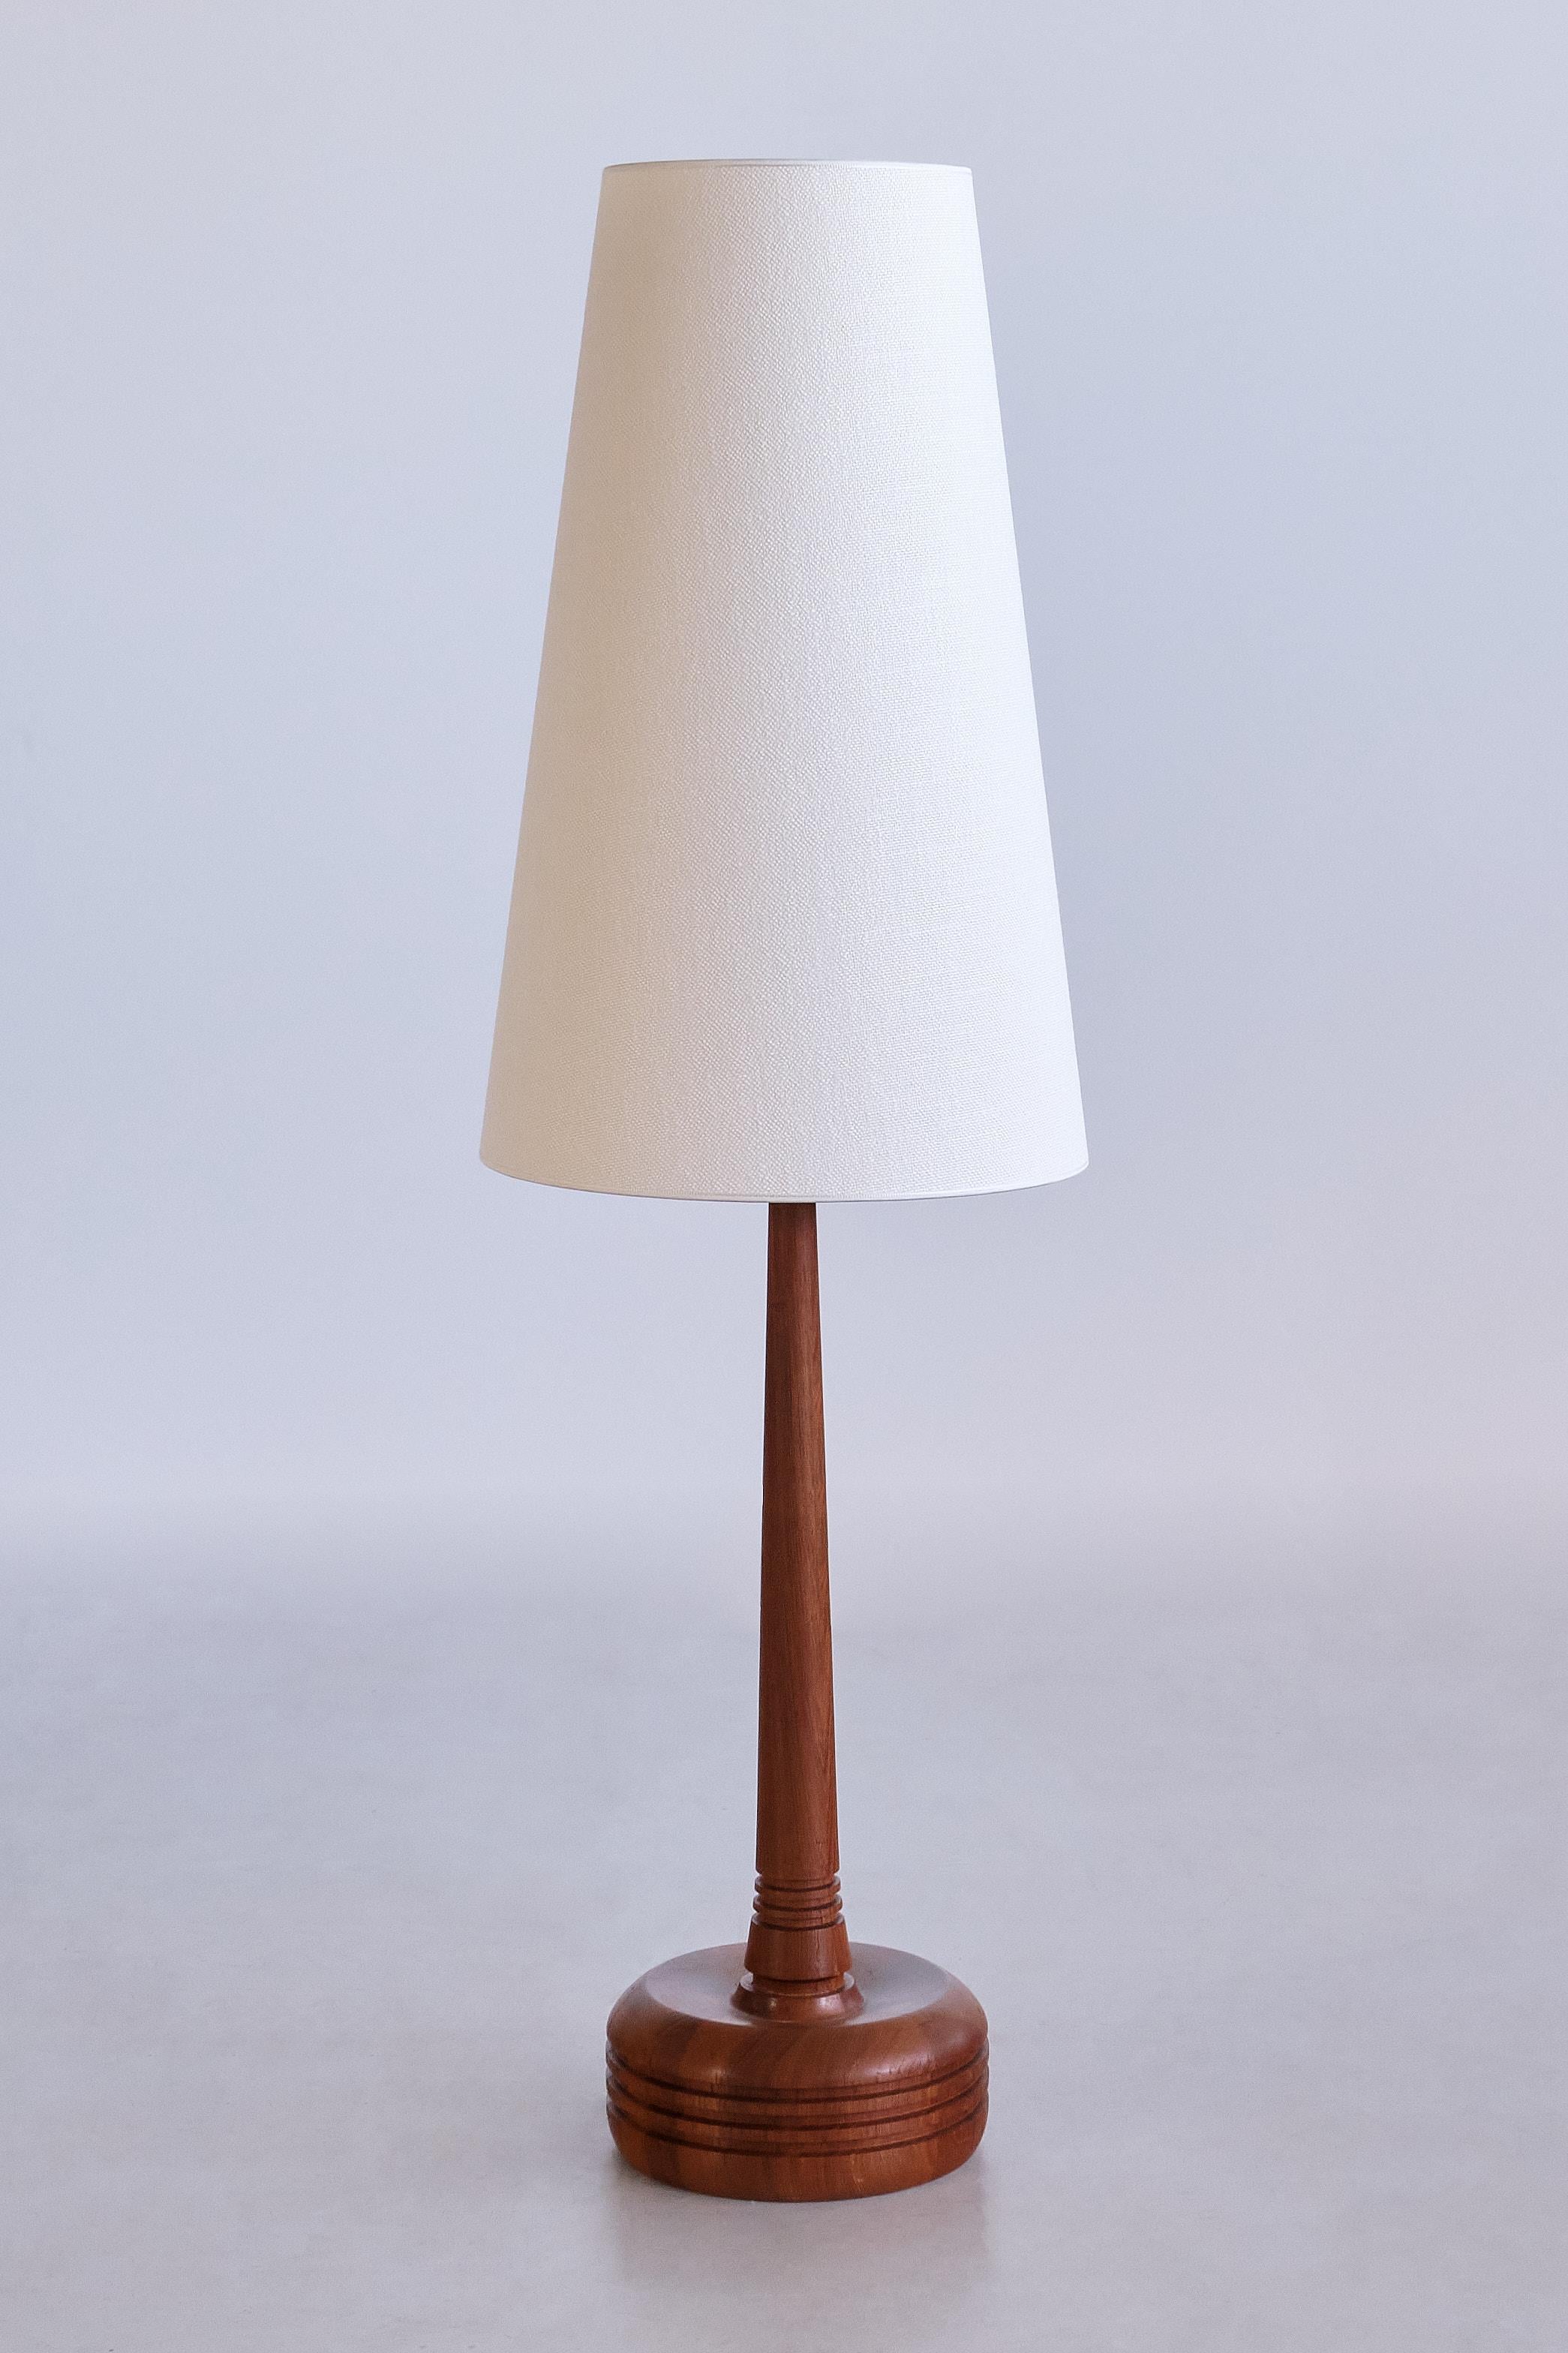 This rare tall table lamp was produced by Tranås Stilarmatur AB in Sweden in the 1960s. The lamp is marked with the manufacturer's sticker next to the bulb holders.
Made of solid teak wood, the circular base and tapered central stem both have three